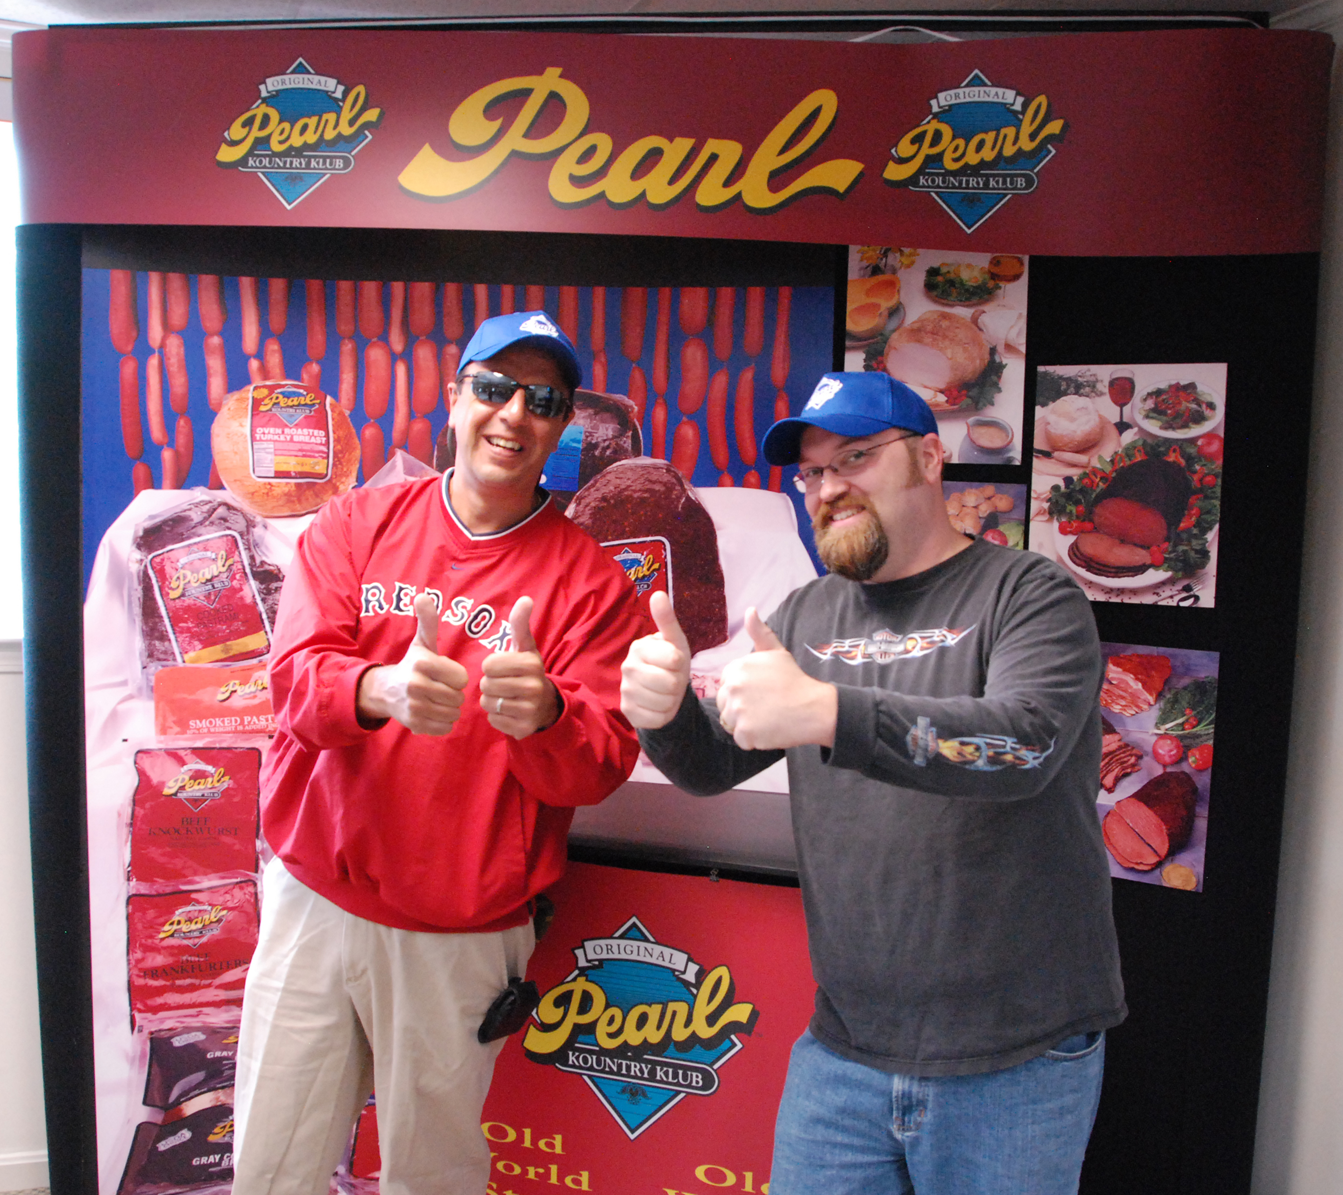 After our Tour of Pearl Meat Packing we give it Two Thumbs Up!